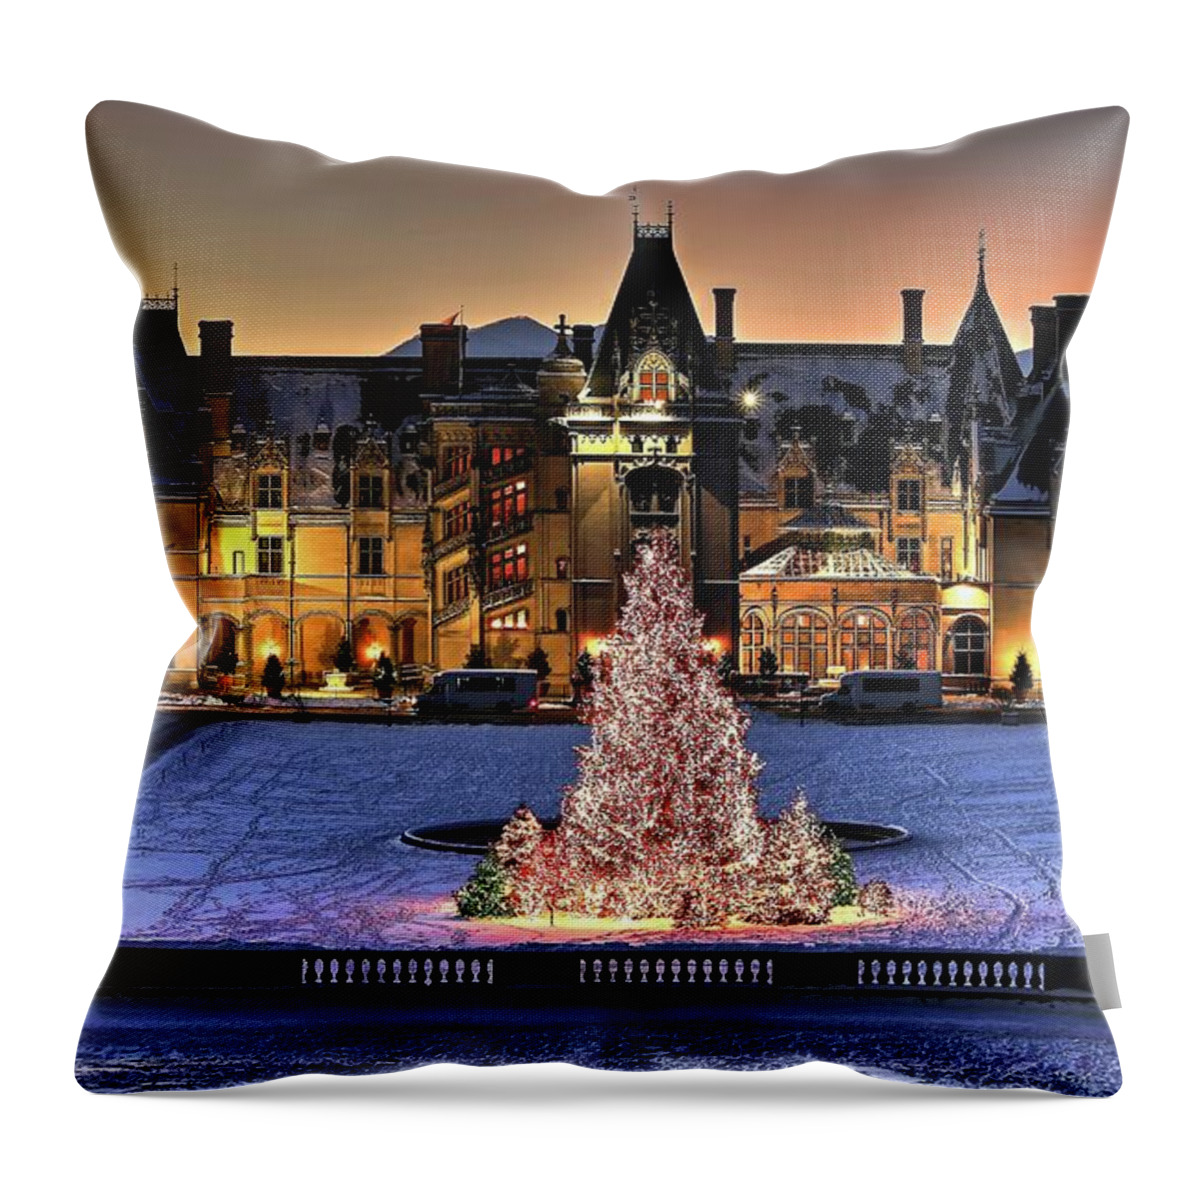 Holidays At Biltmore House Throw Pillow featuring the photograph Biltmore Christmas Night All Covered In Snow by Carol Montoya